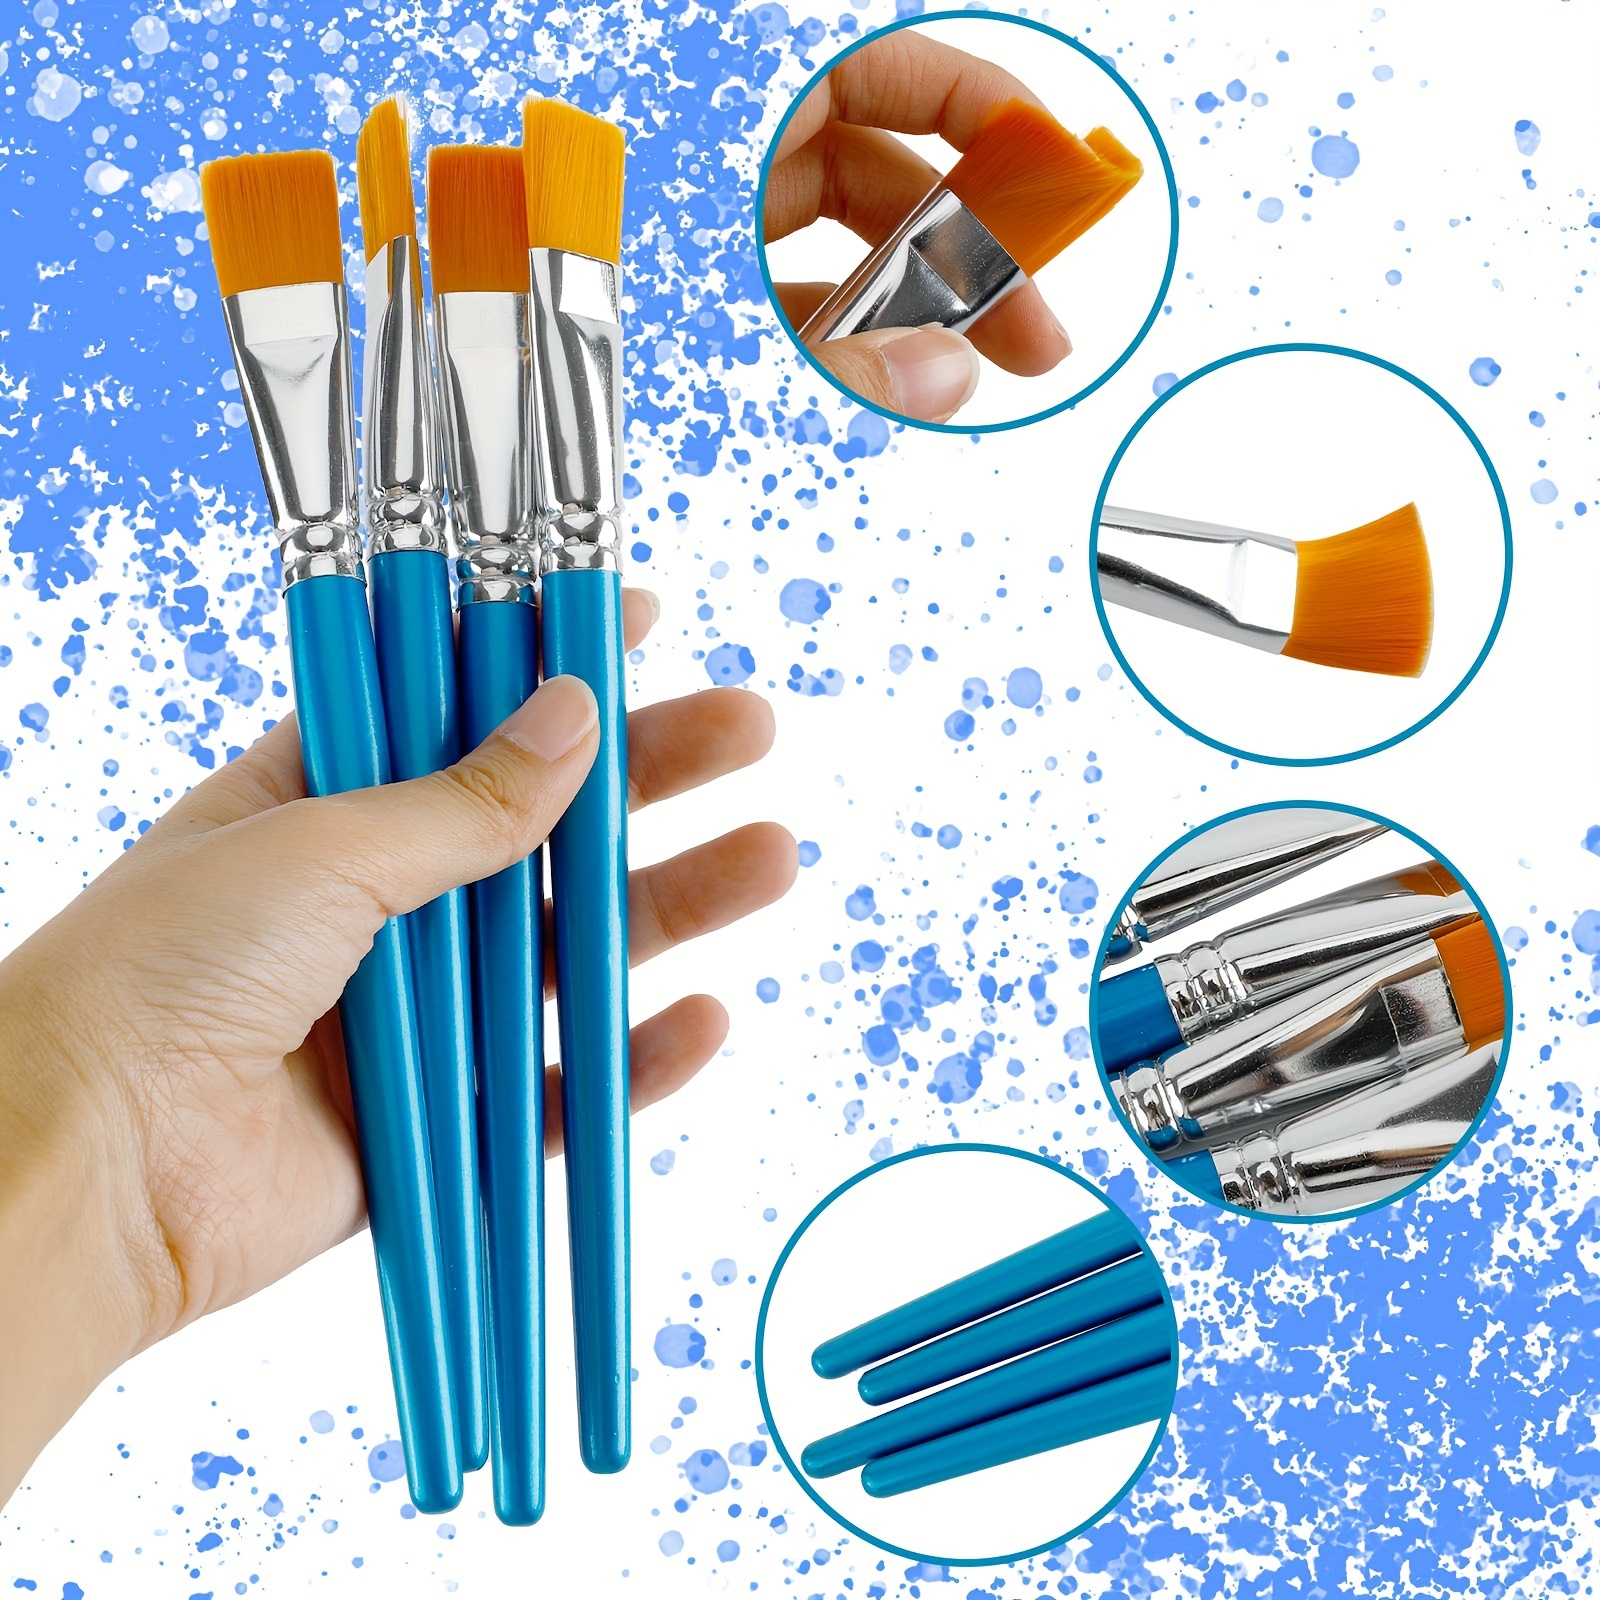 10pcs 1 inch Flat Paint Brushes Acrylic Paint Brush Big Paint Brushes Watercolor Synthetic Brushes Bulk Wooden Handle Painting Brush Detail Oil